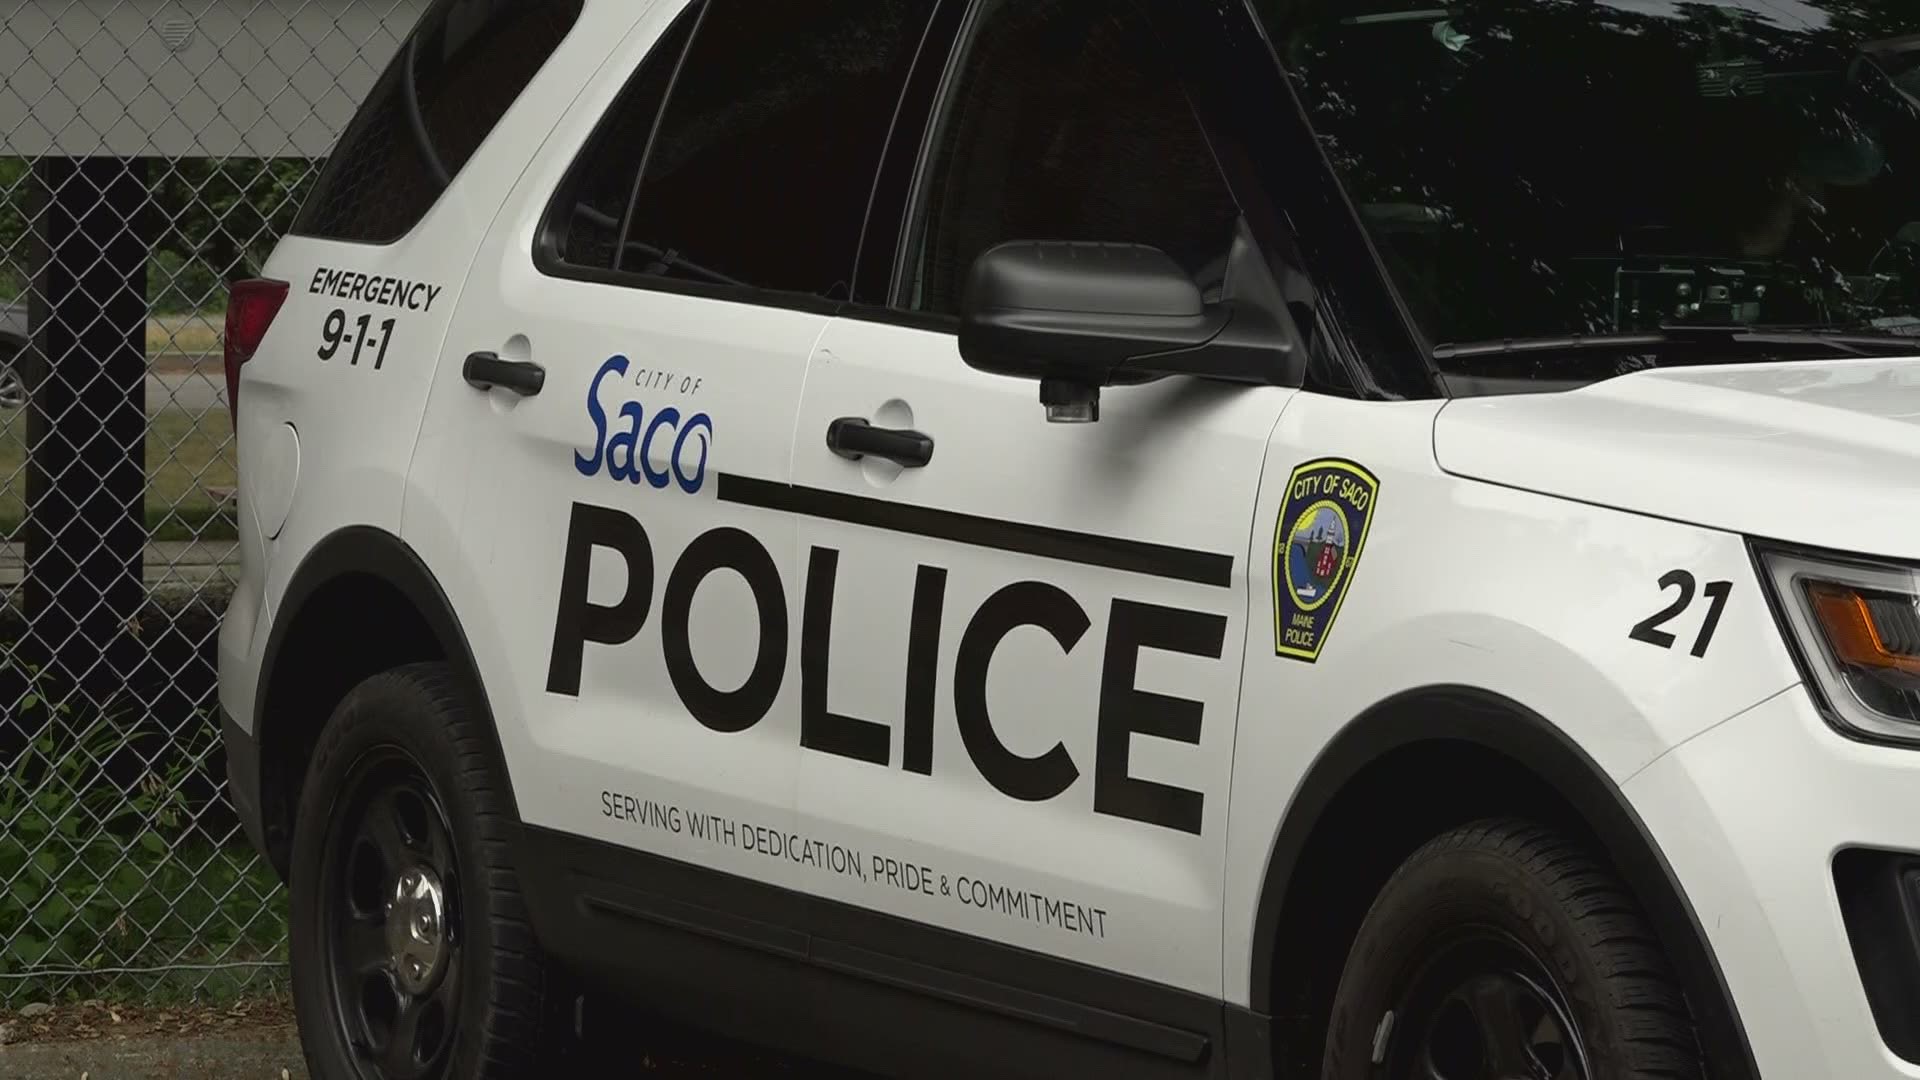 Saco Police wins grant, announces effort to bolster bias training for departments across Maine